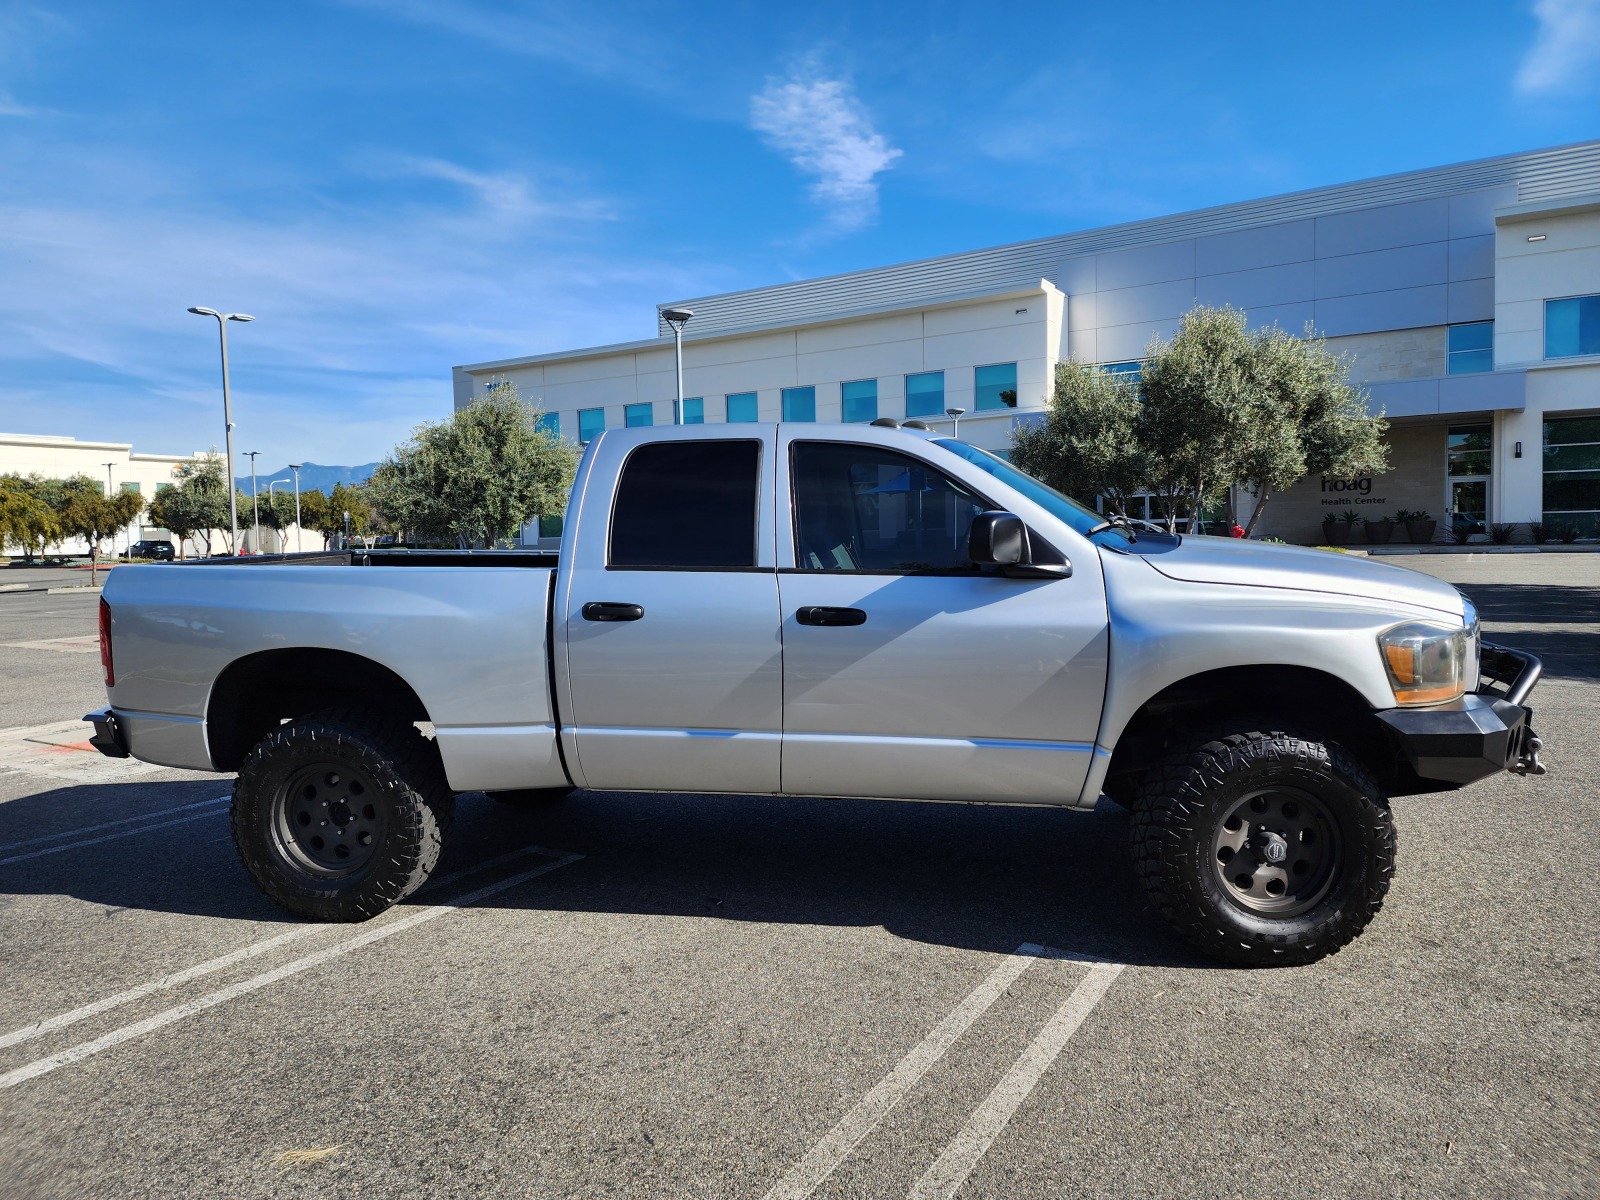 For Sale: *REDUCED* Clean 2006 Ram 1500 SLT 4x4 5.7L V8 | $20k+ UPGRADES | Well Maintained | Low Miles! - photo3